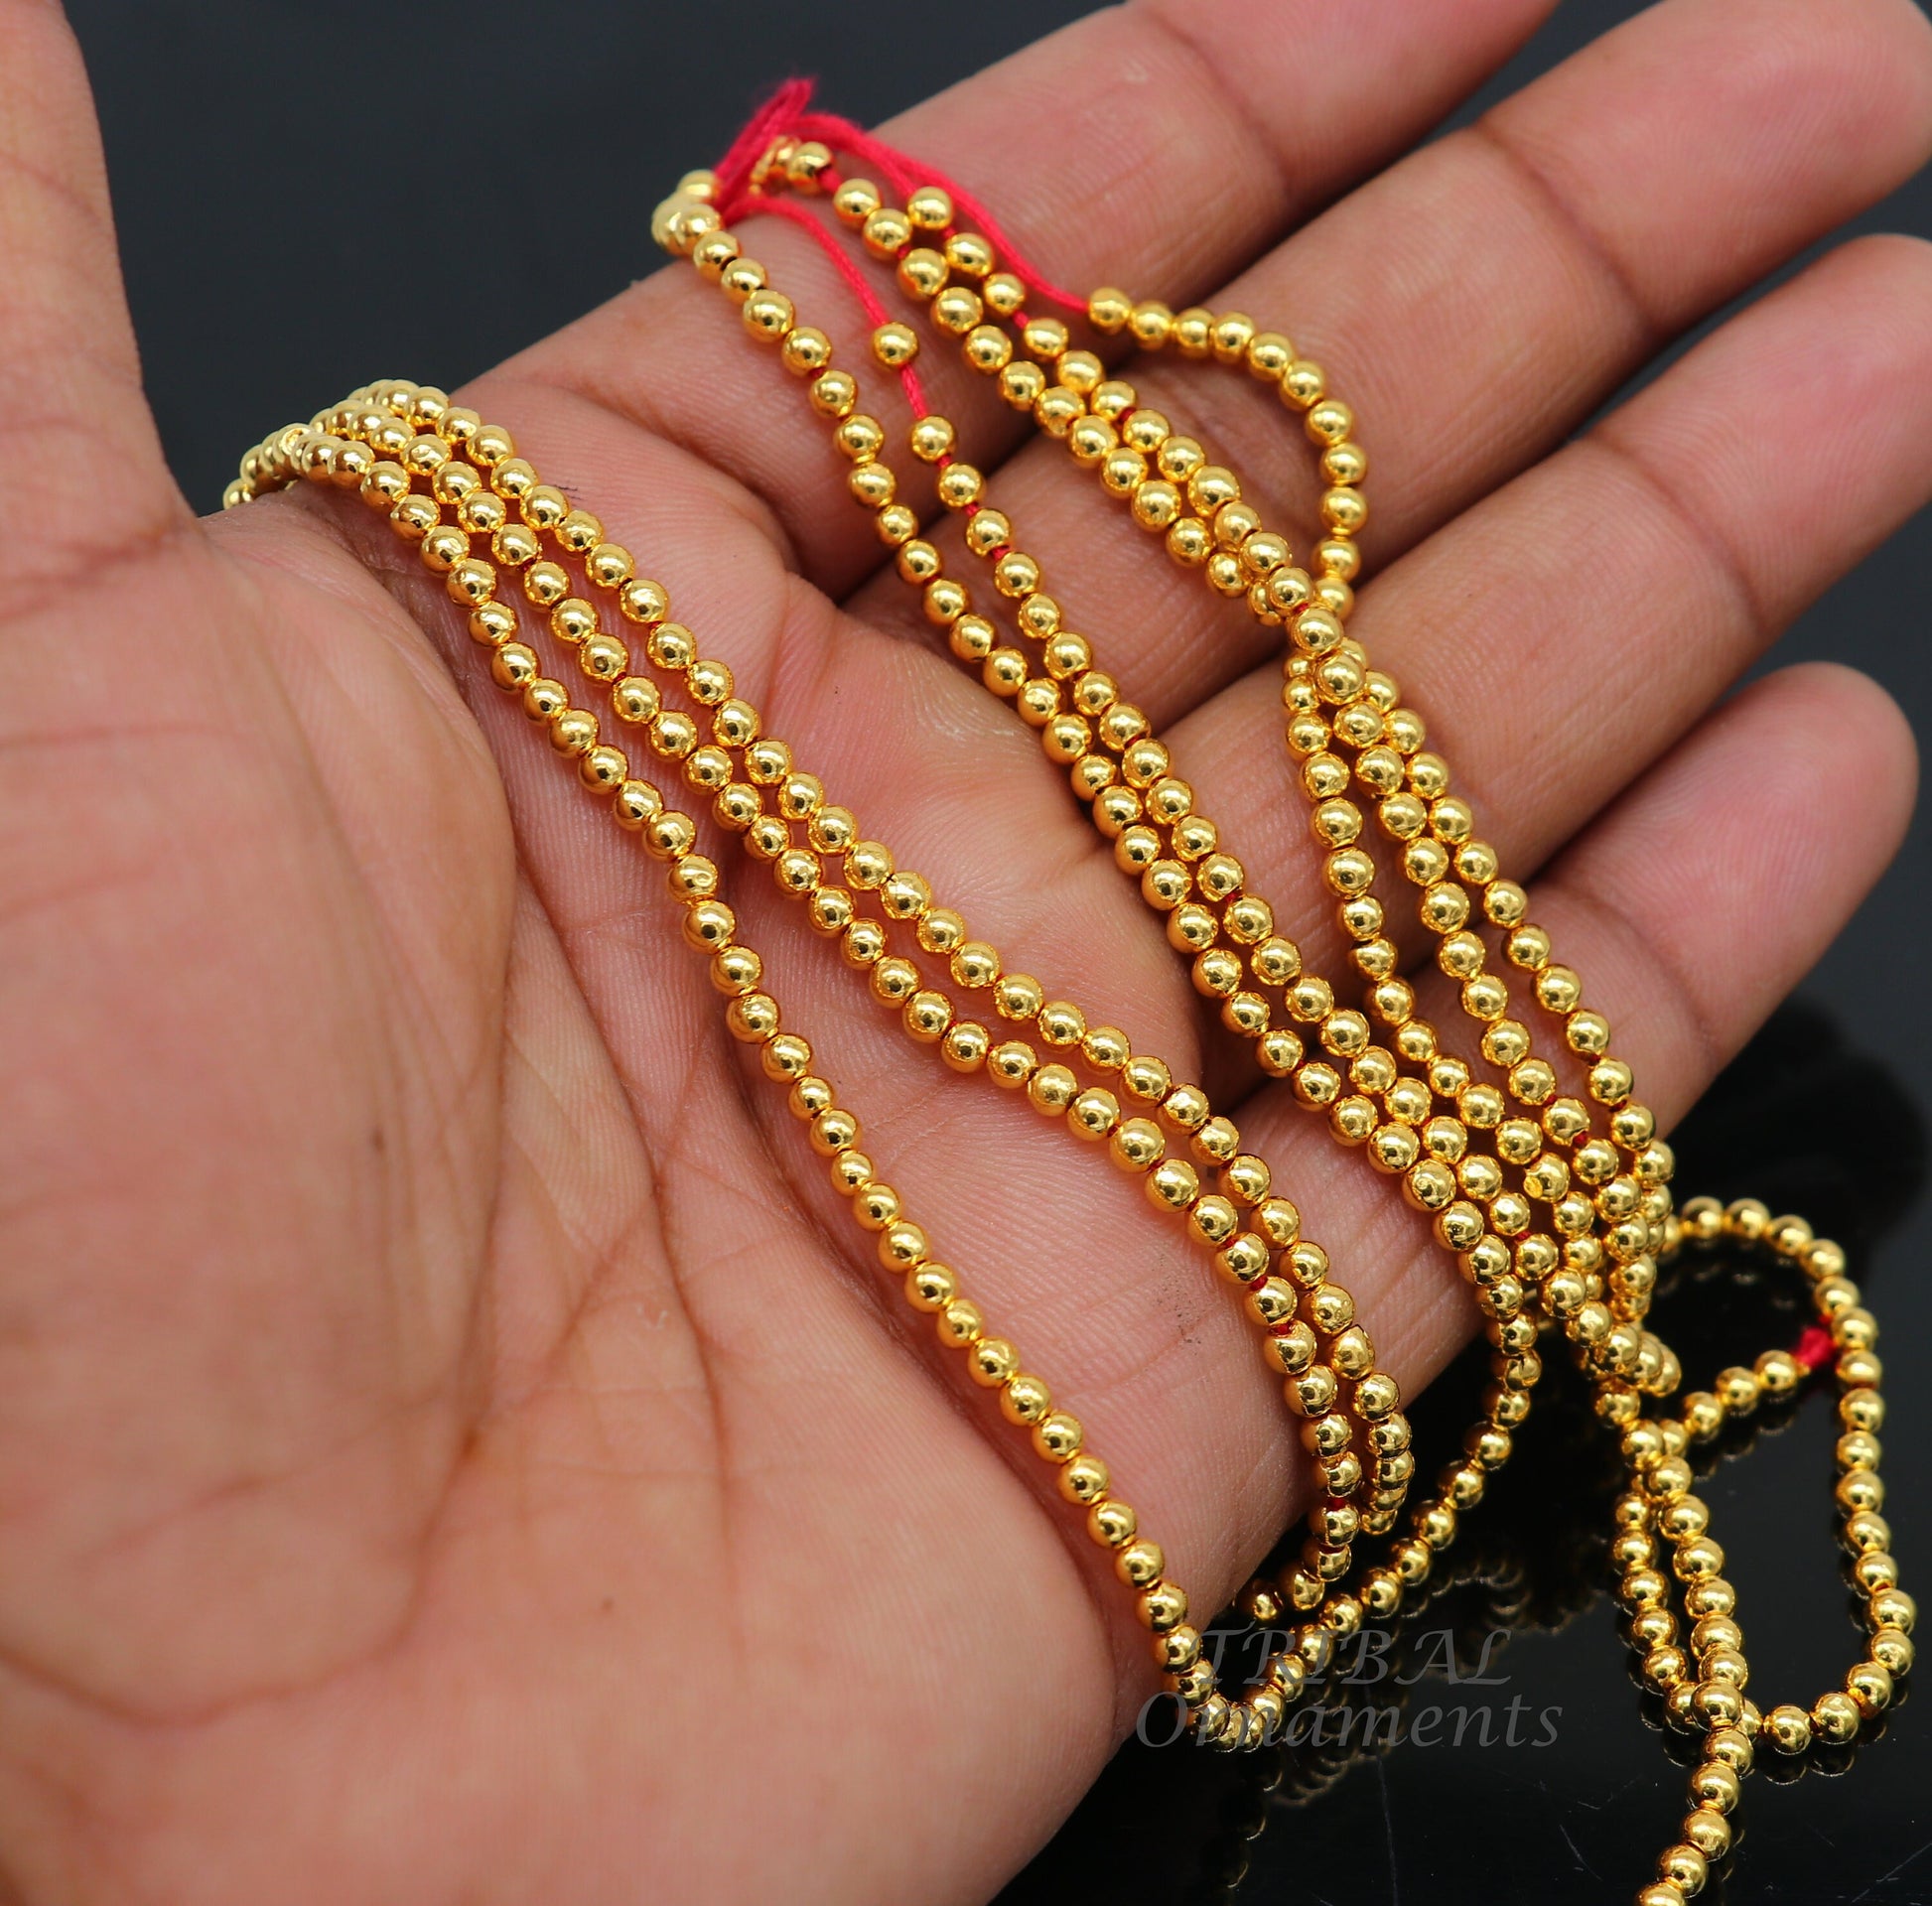 lot 20 pieces 3mm gold beads Vintage handmade loose beads ethnic designer 22k yellow gold beads or ball for custom jewelry making bd25 - TRIBAL ORNAMENTS